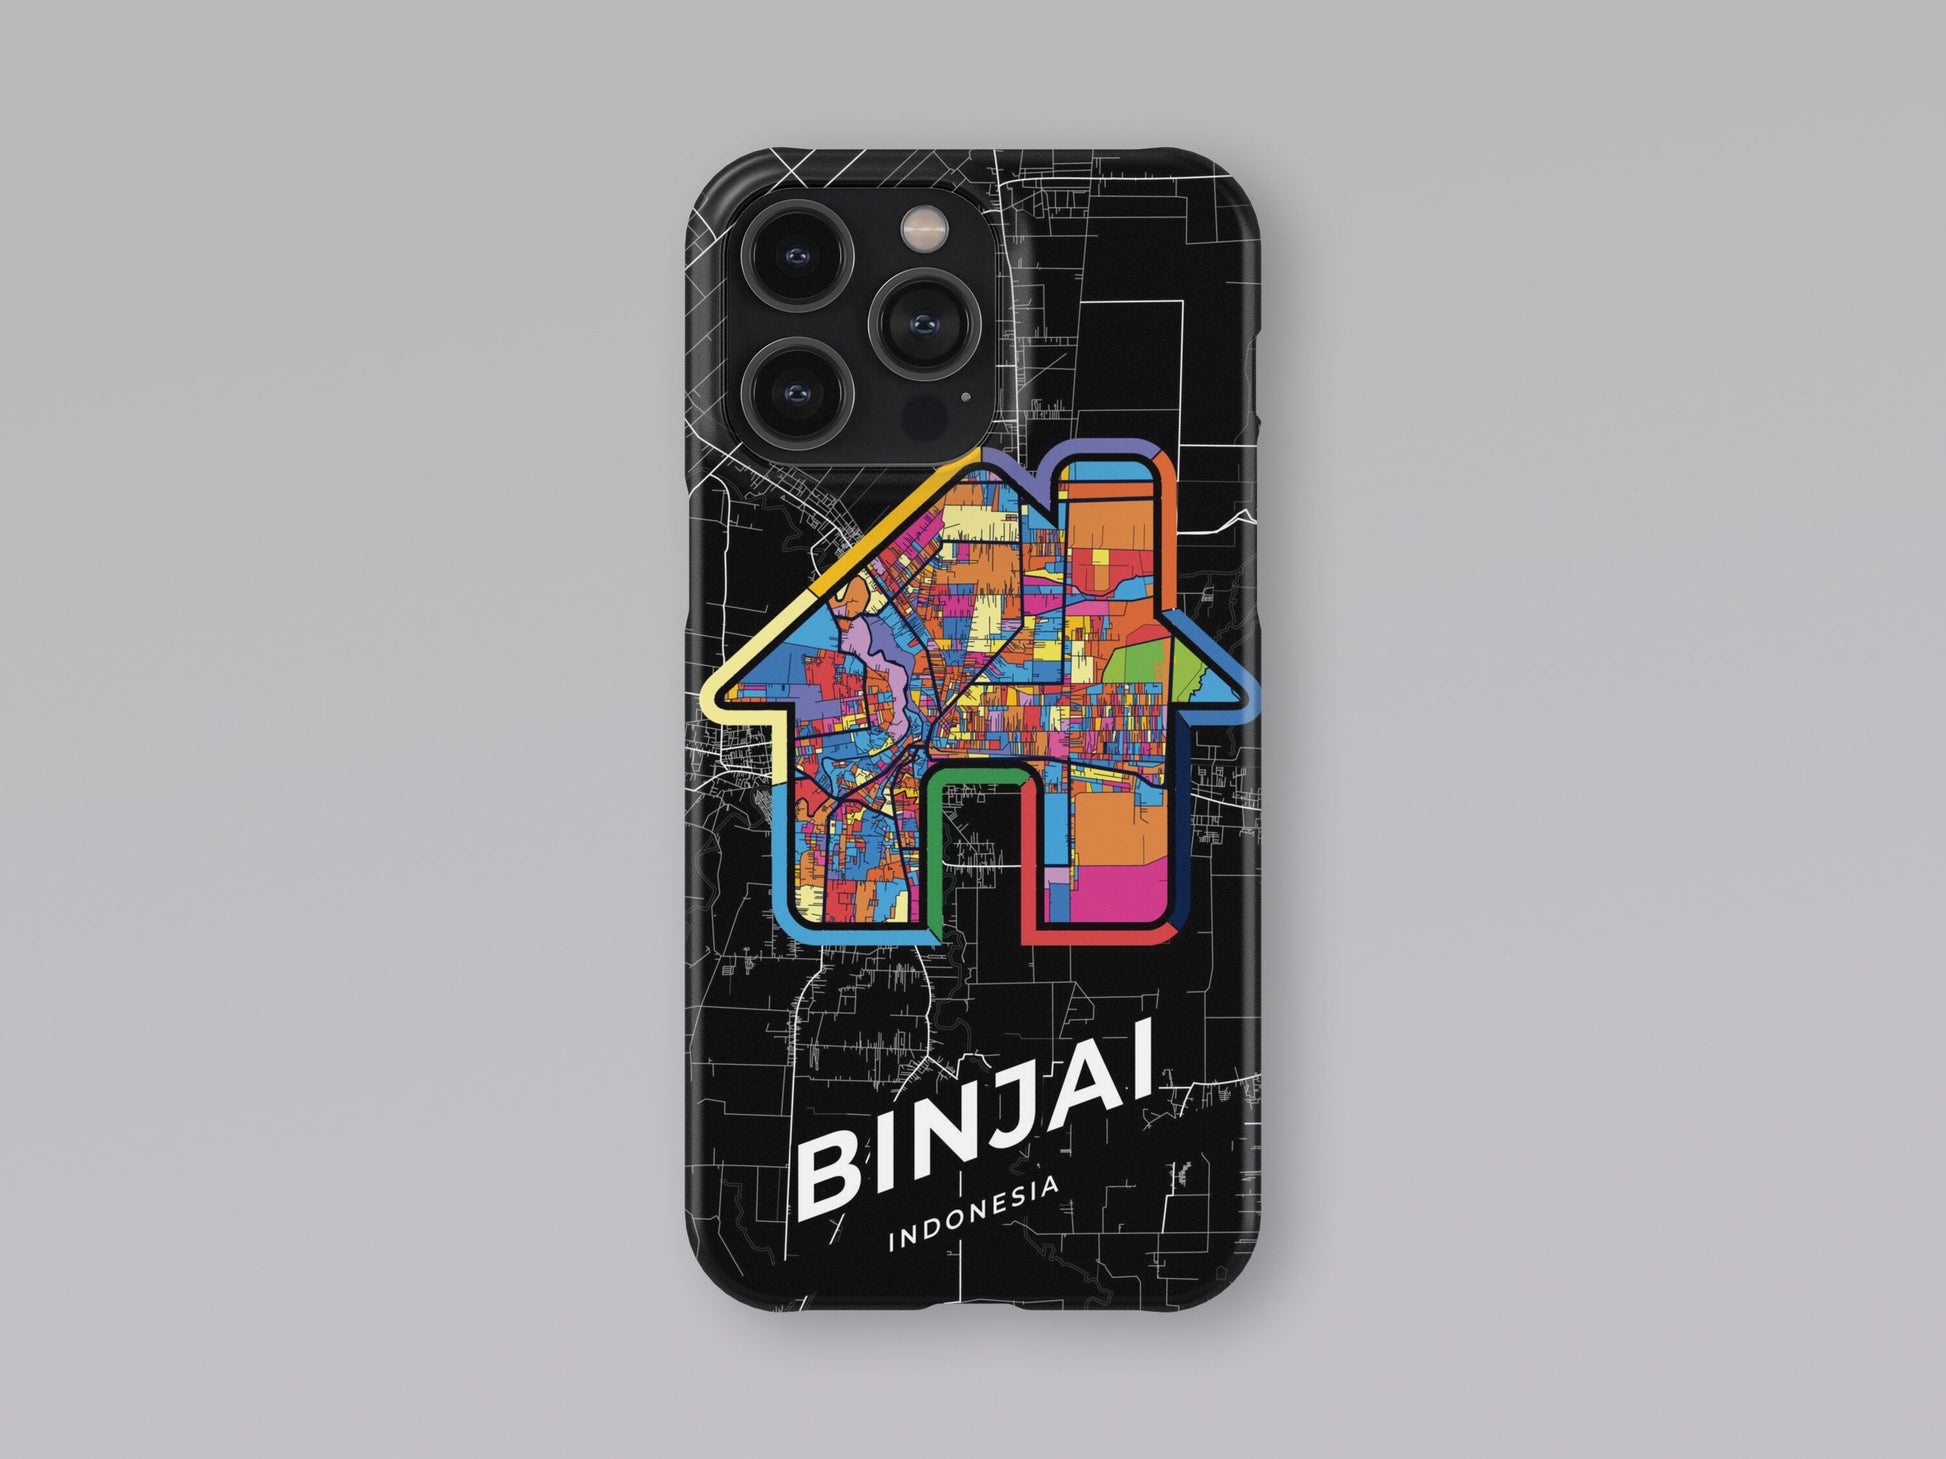 Binjai Indonesia slim phone case with colorful icon. Birthday, wedding or housewarming gift. Couple match cases. 3